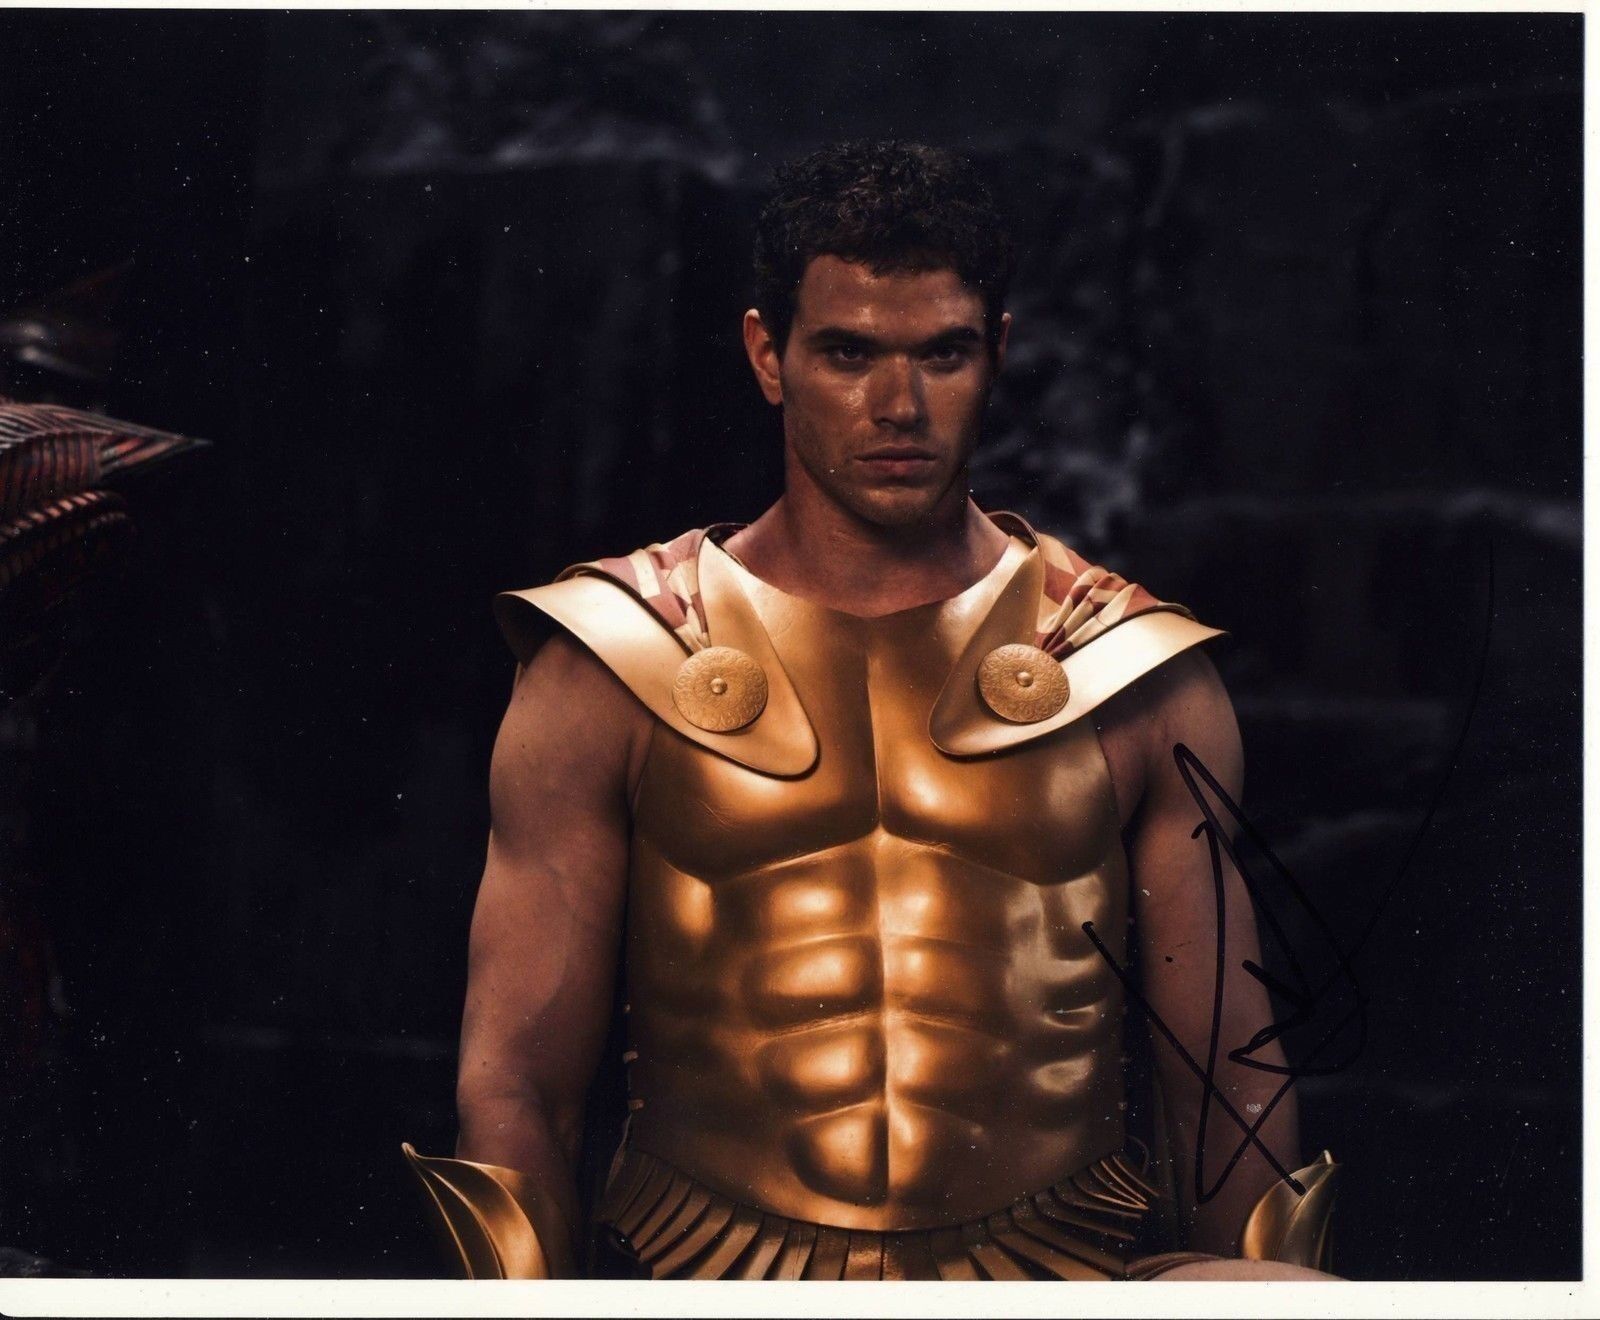 Kellan Lutz Autograph The LEGEND of HERCULES Signed 8x10 Photo Poster painting AFTAL [6741]